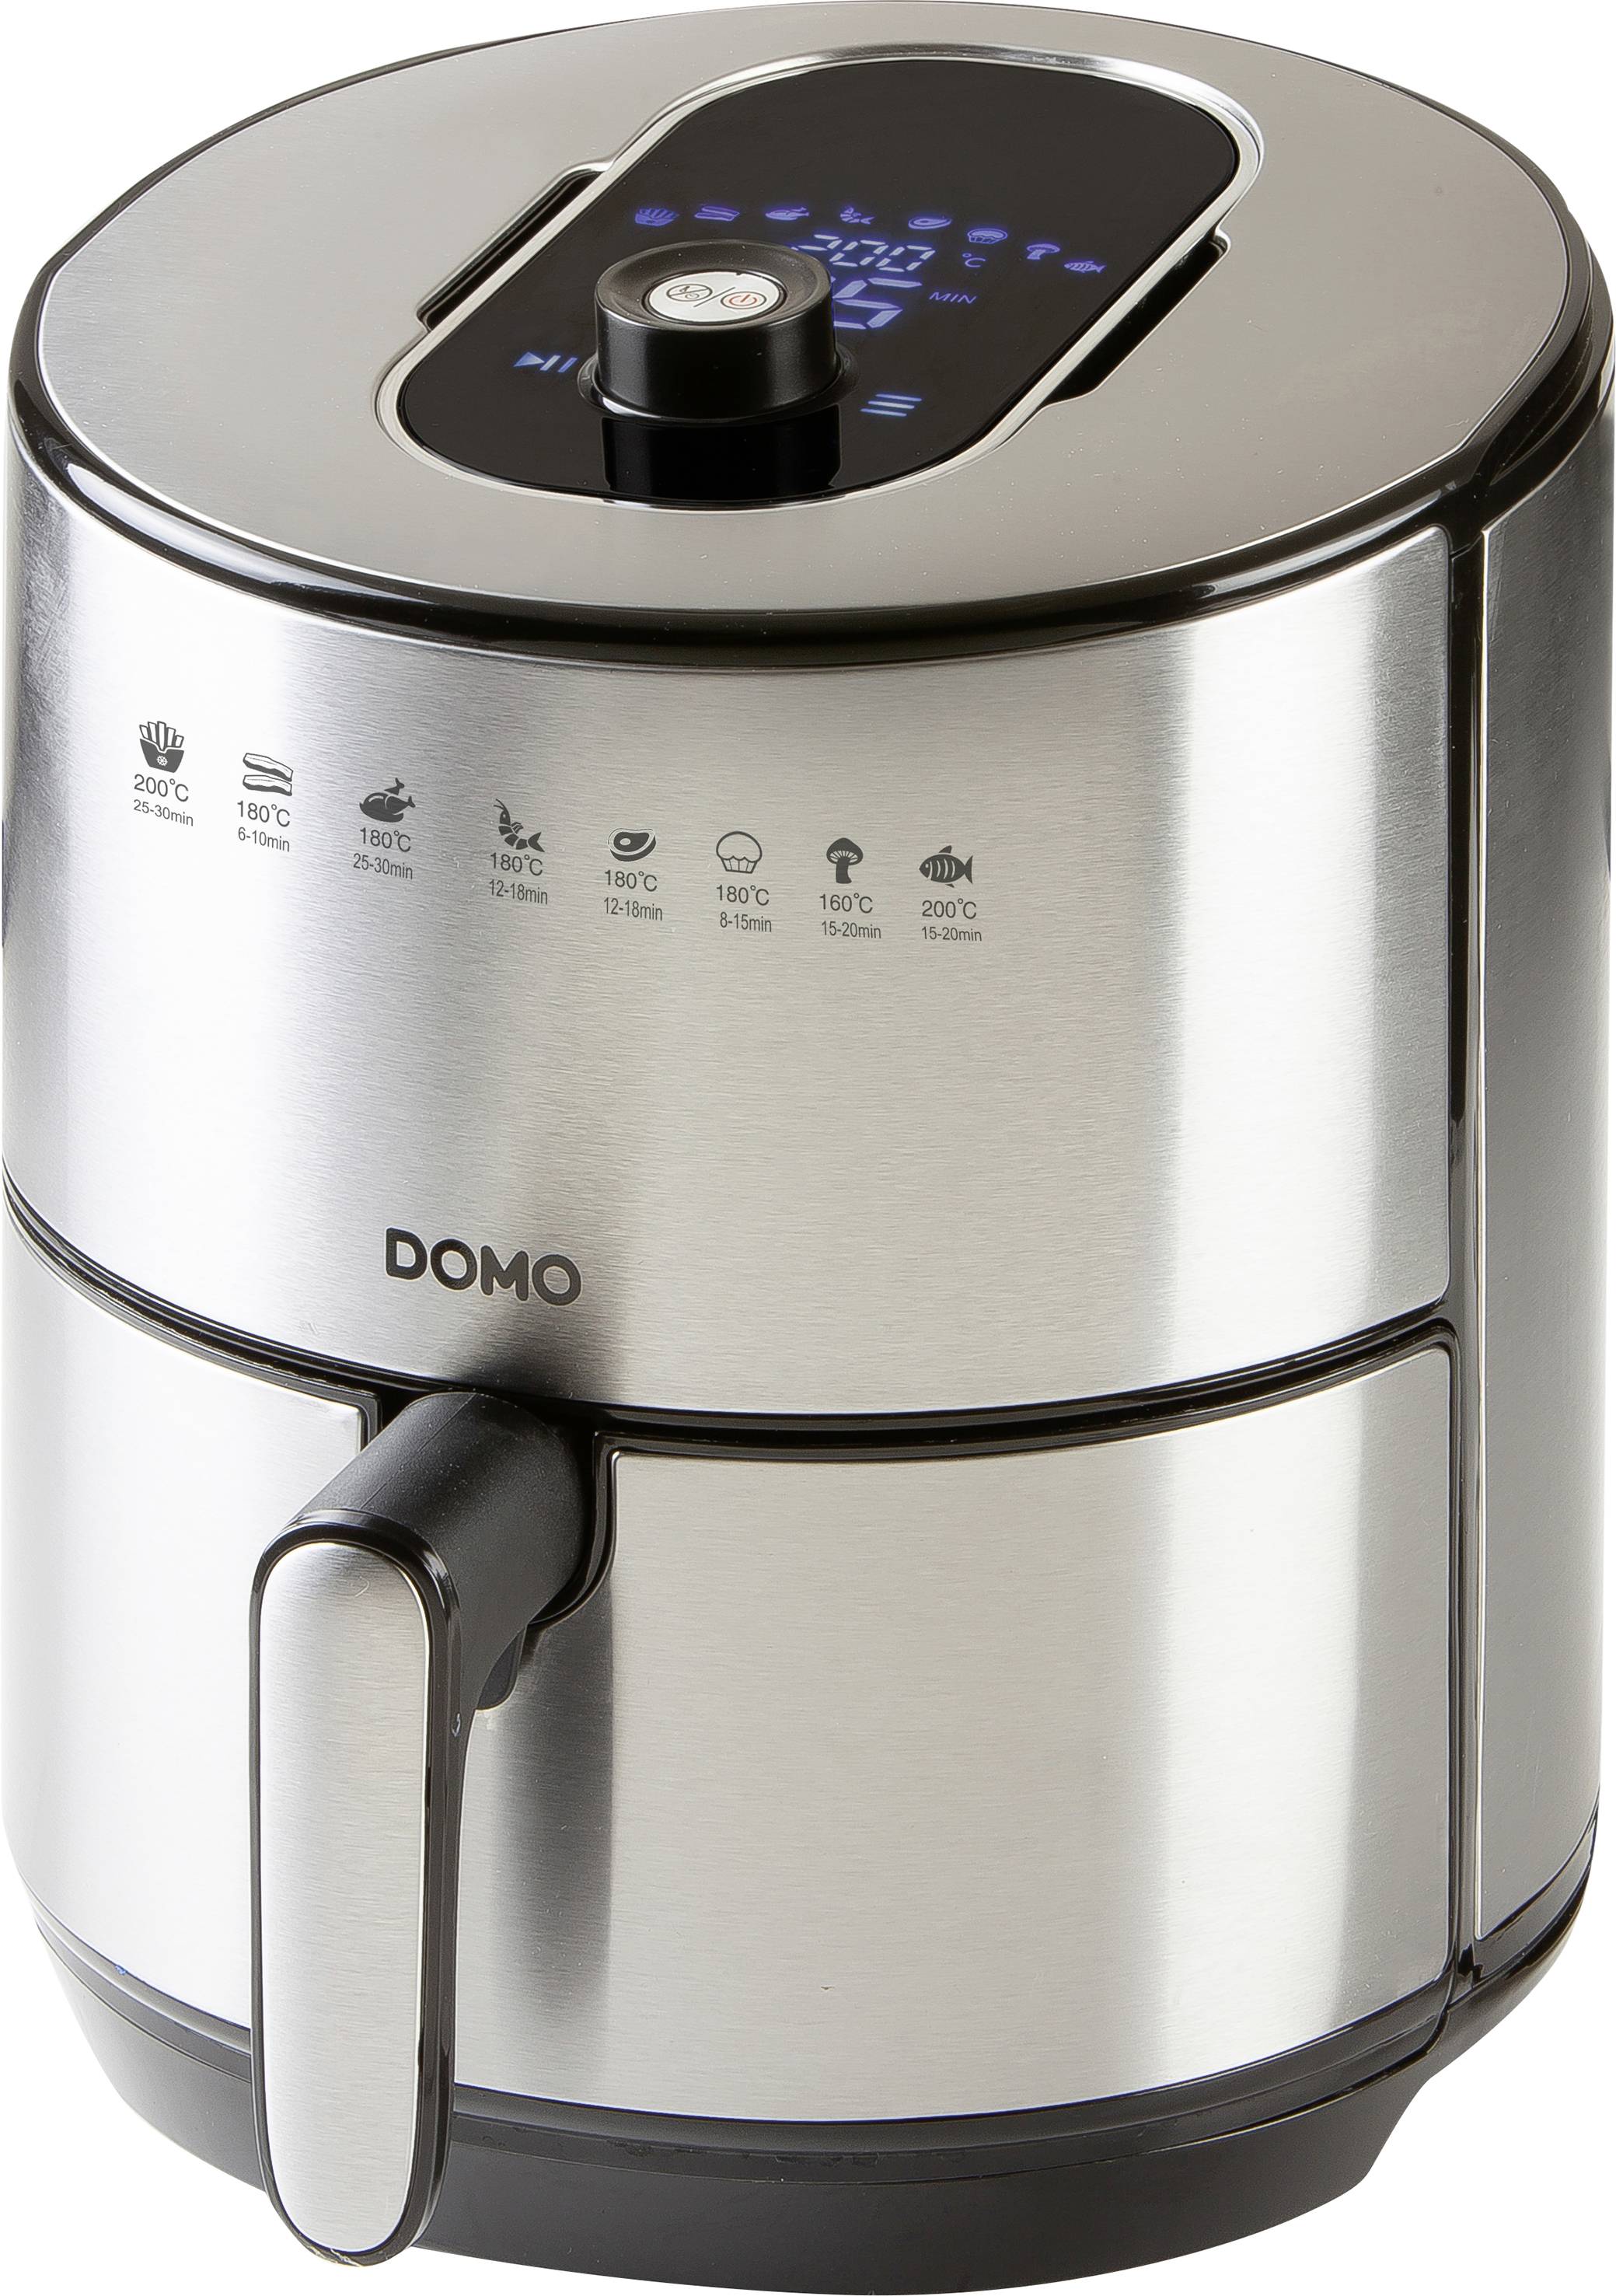 DOMO Deli-Freyer XL Deep fryer fuction, with display, touch housing, coating, Overheat protection |